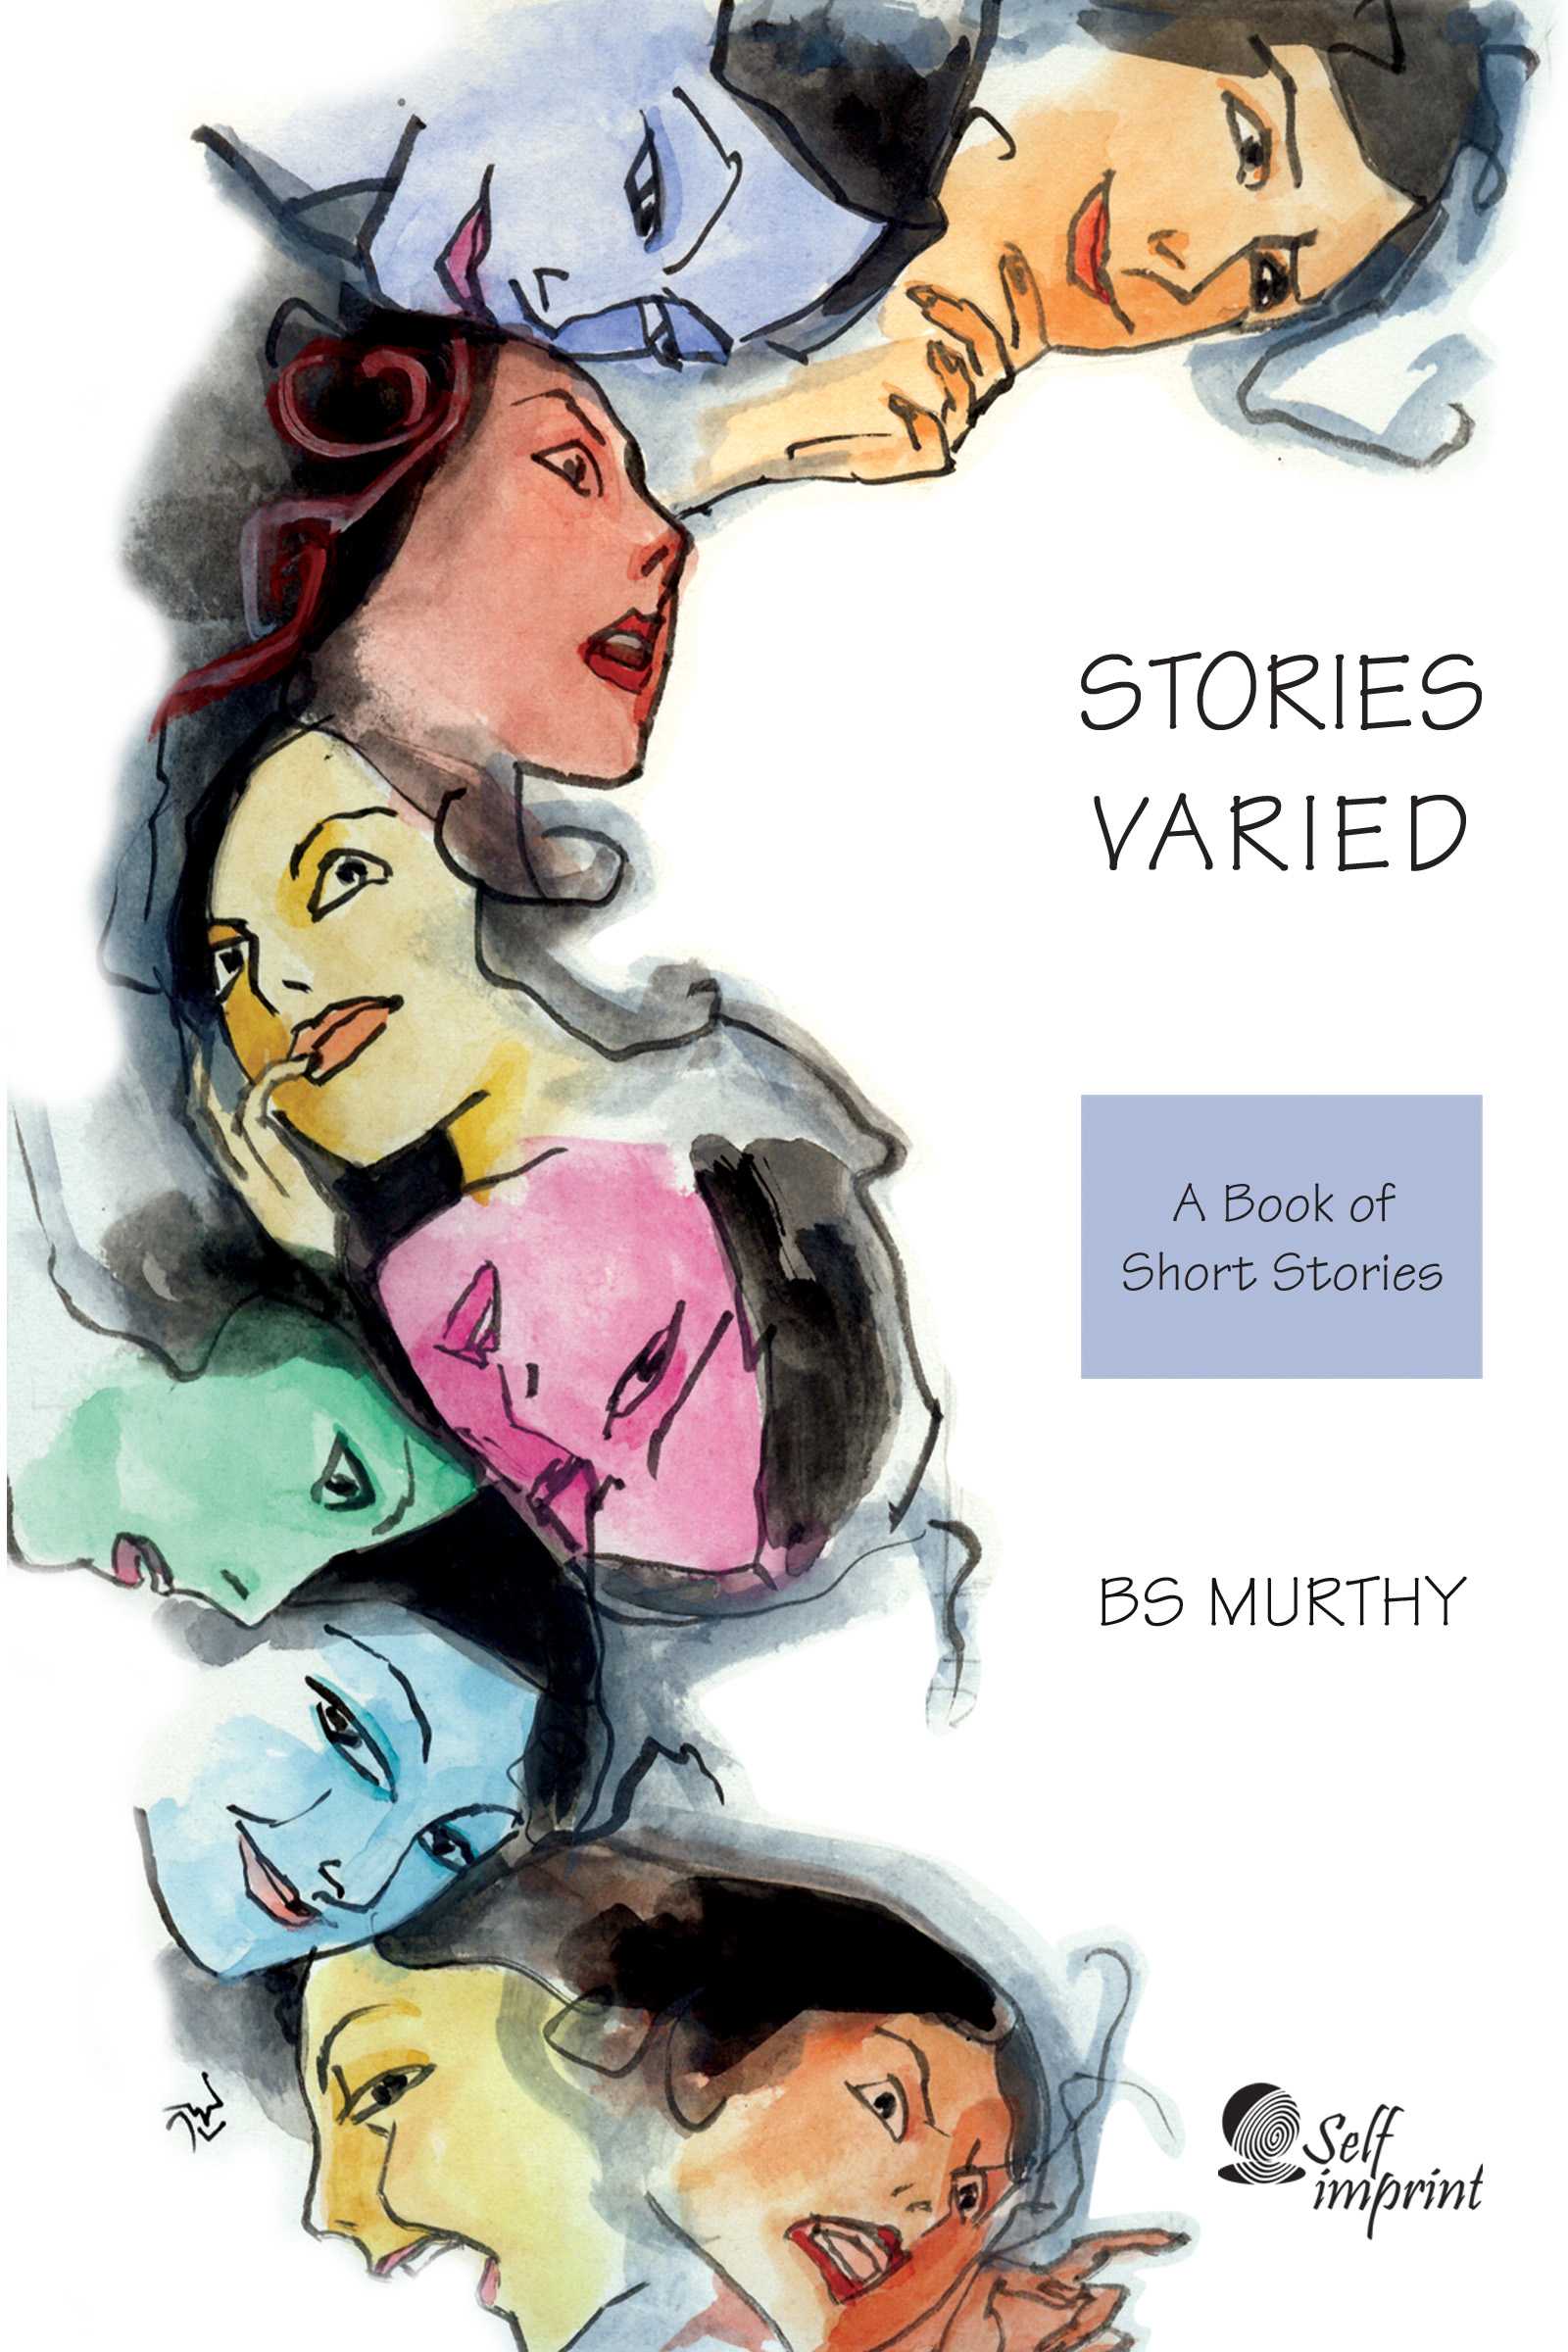 Stories Varied - A book of short stories